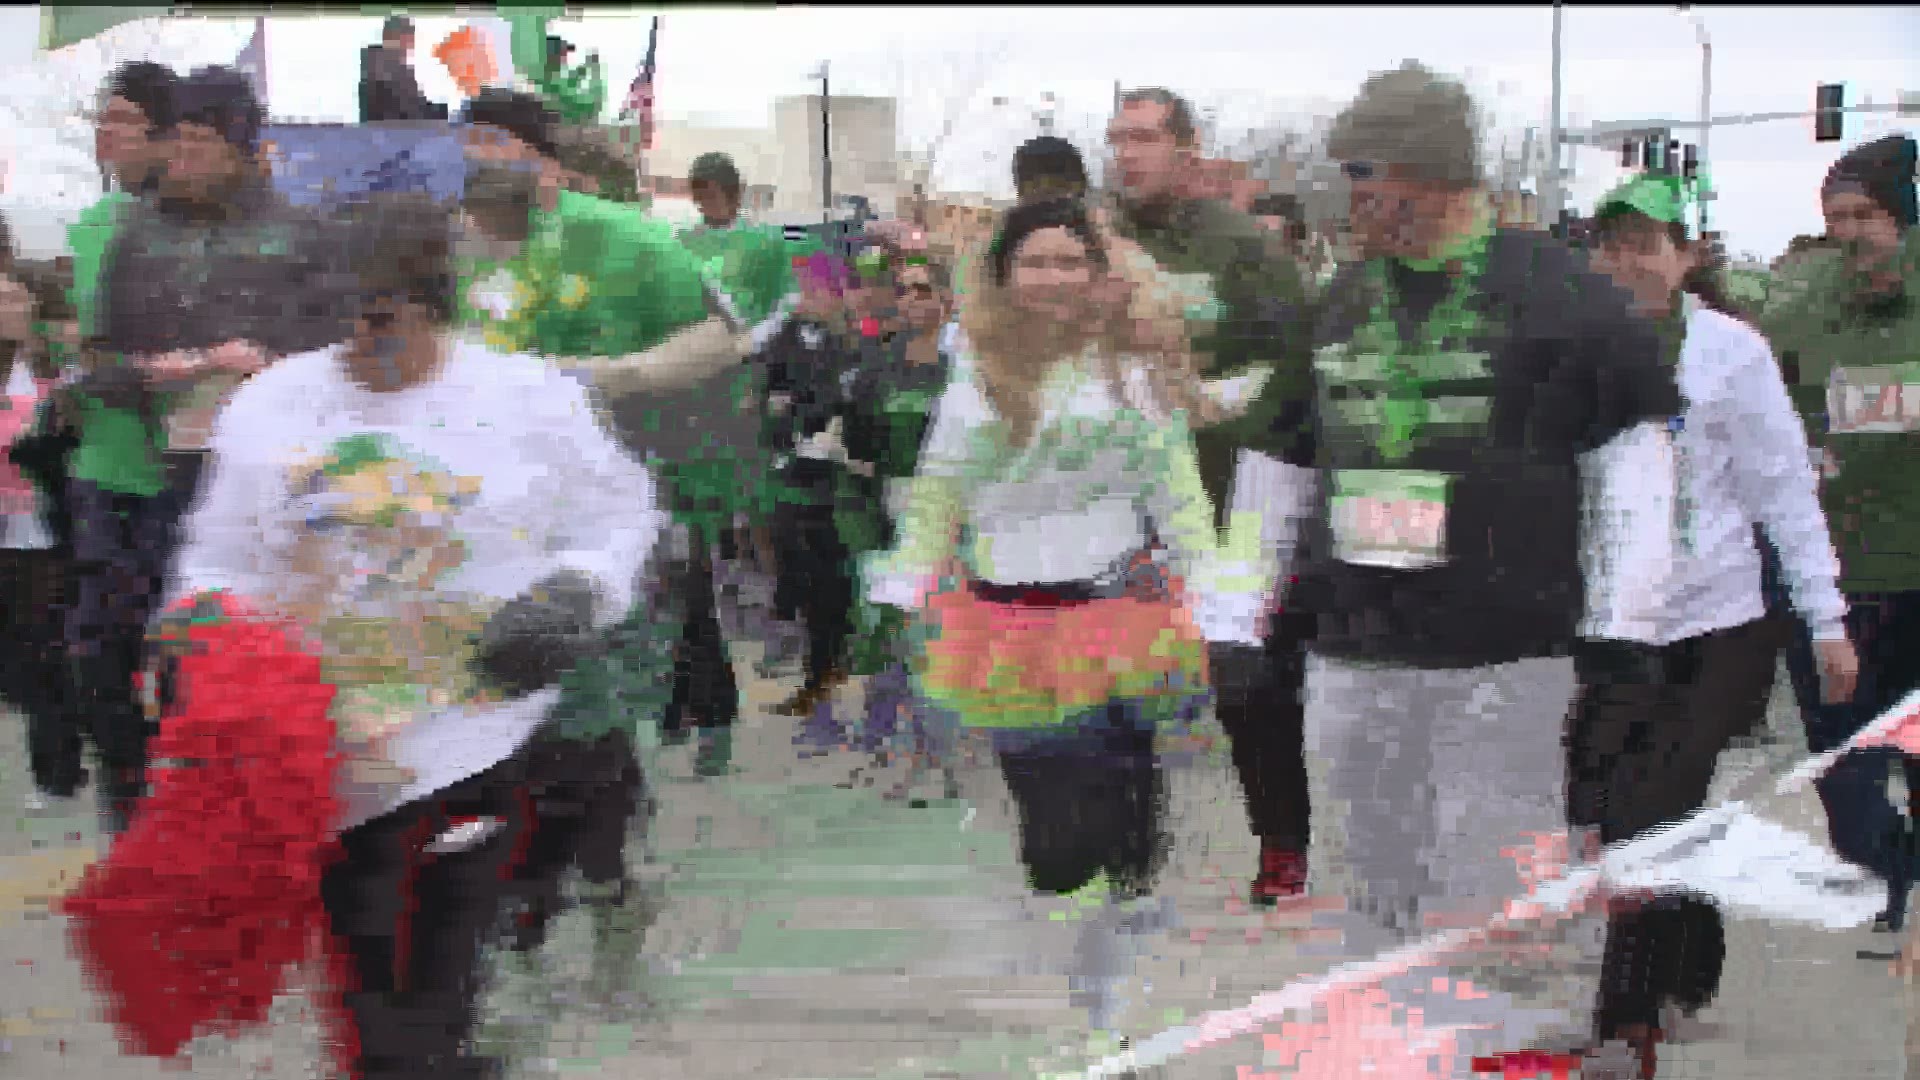 This is the 38th year for the CASI race, making it one of the QC's oldest St. Patrick's Day traditions.